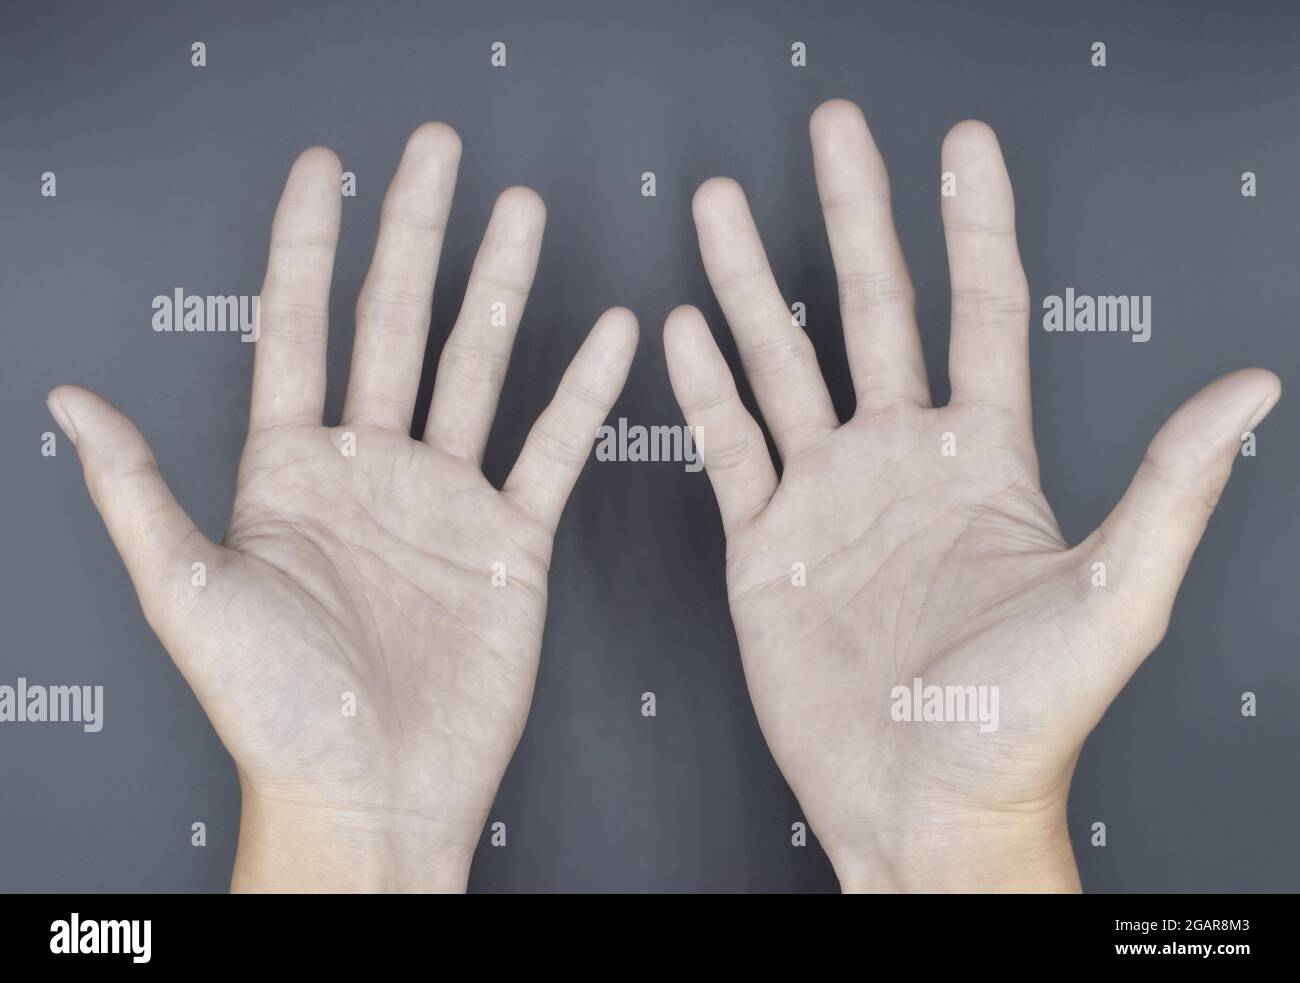 Pale palmar surface of both hands. Anaemic hands of Asian, Chinese man. Isolated on grey background. Stock Photo